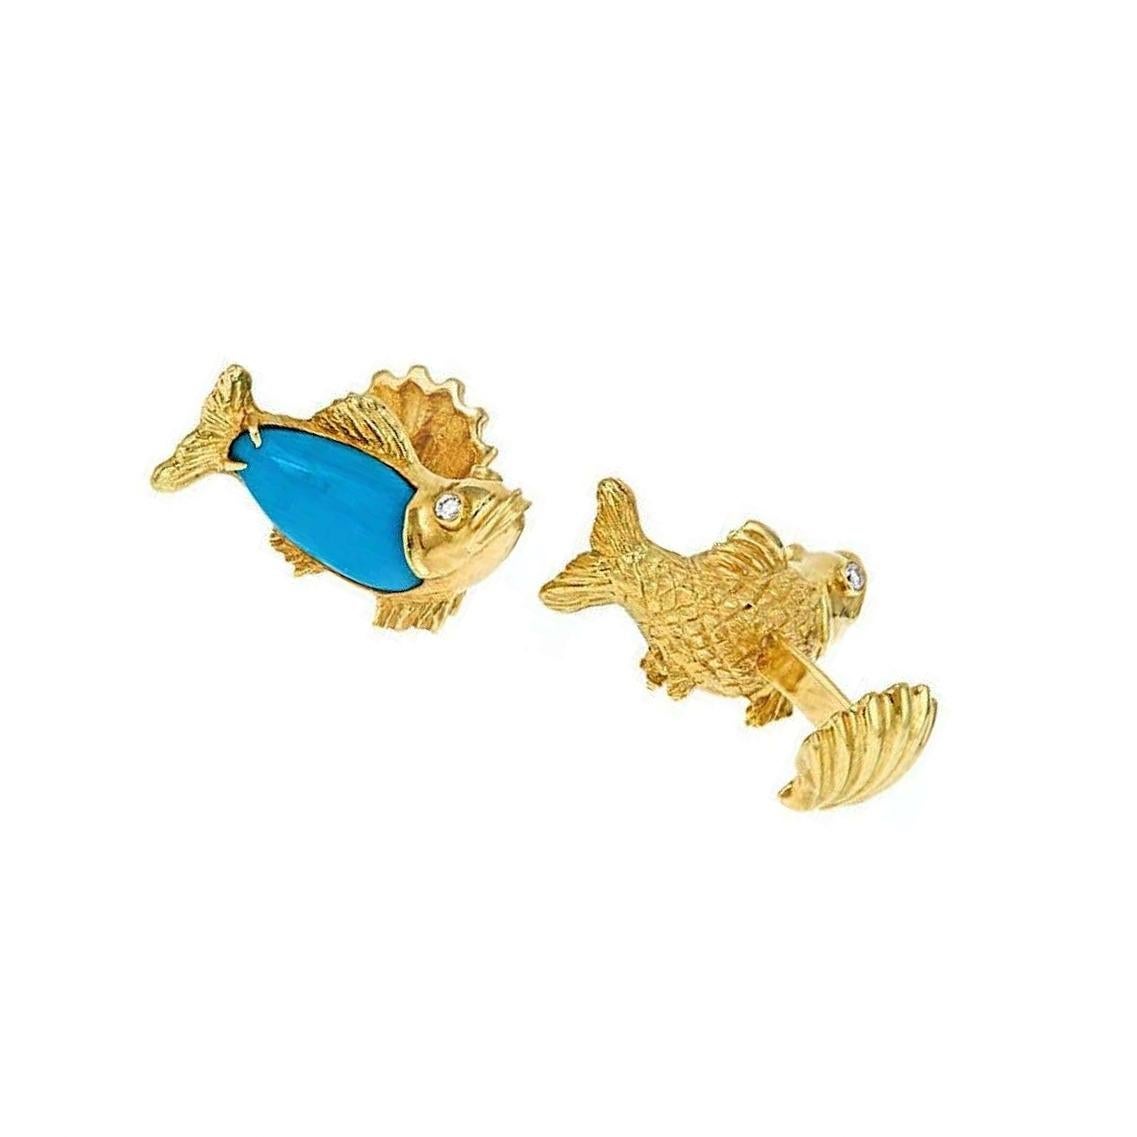 Diamond Turquoise 18 Karat Yellow Gold FISH Cufflinks by John Landrum Bryant In New Condition For Sale In New York, NY